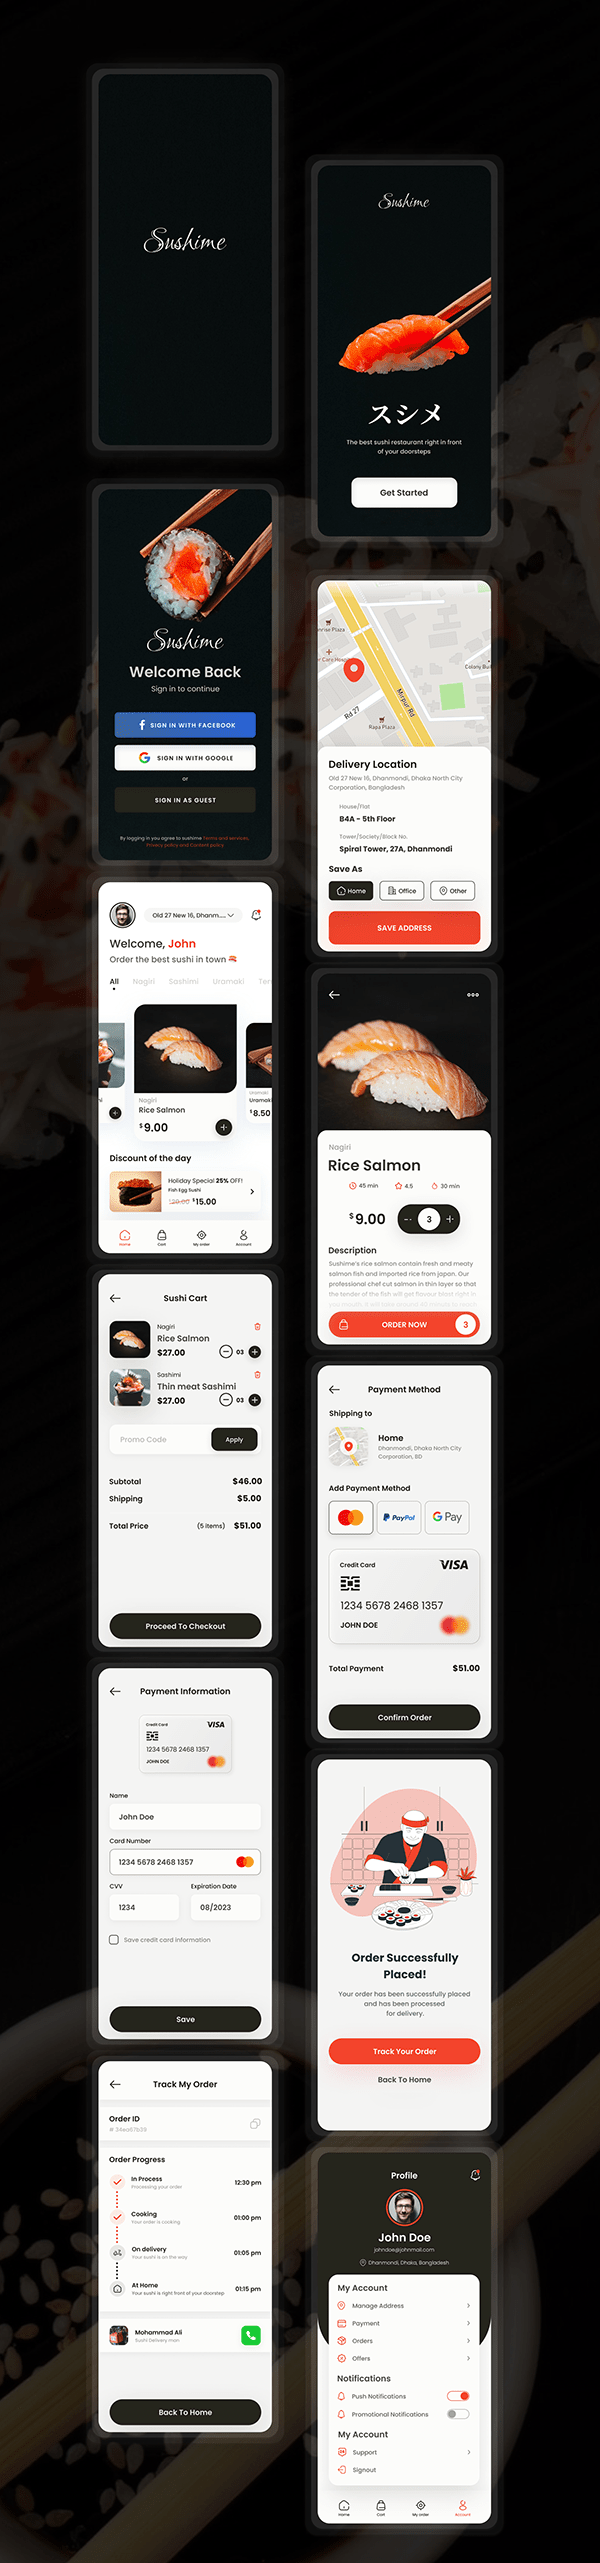 Sushime - Sushi Delivery App